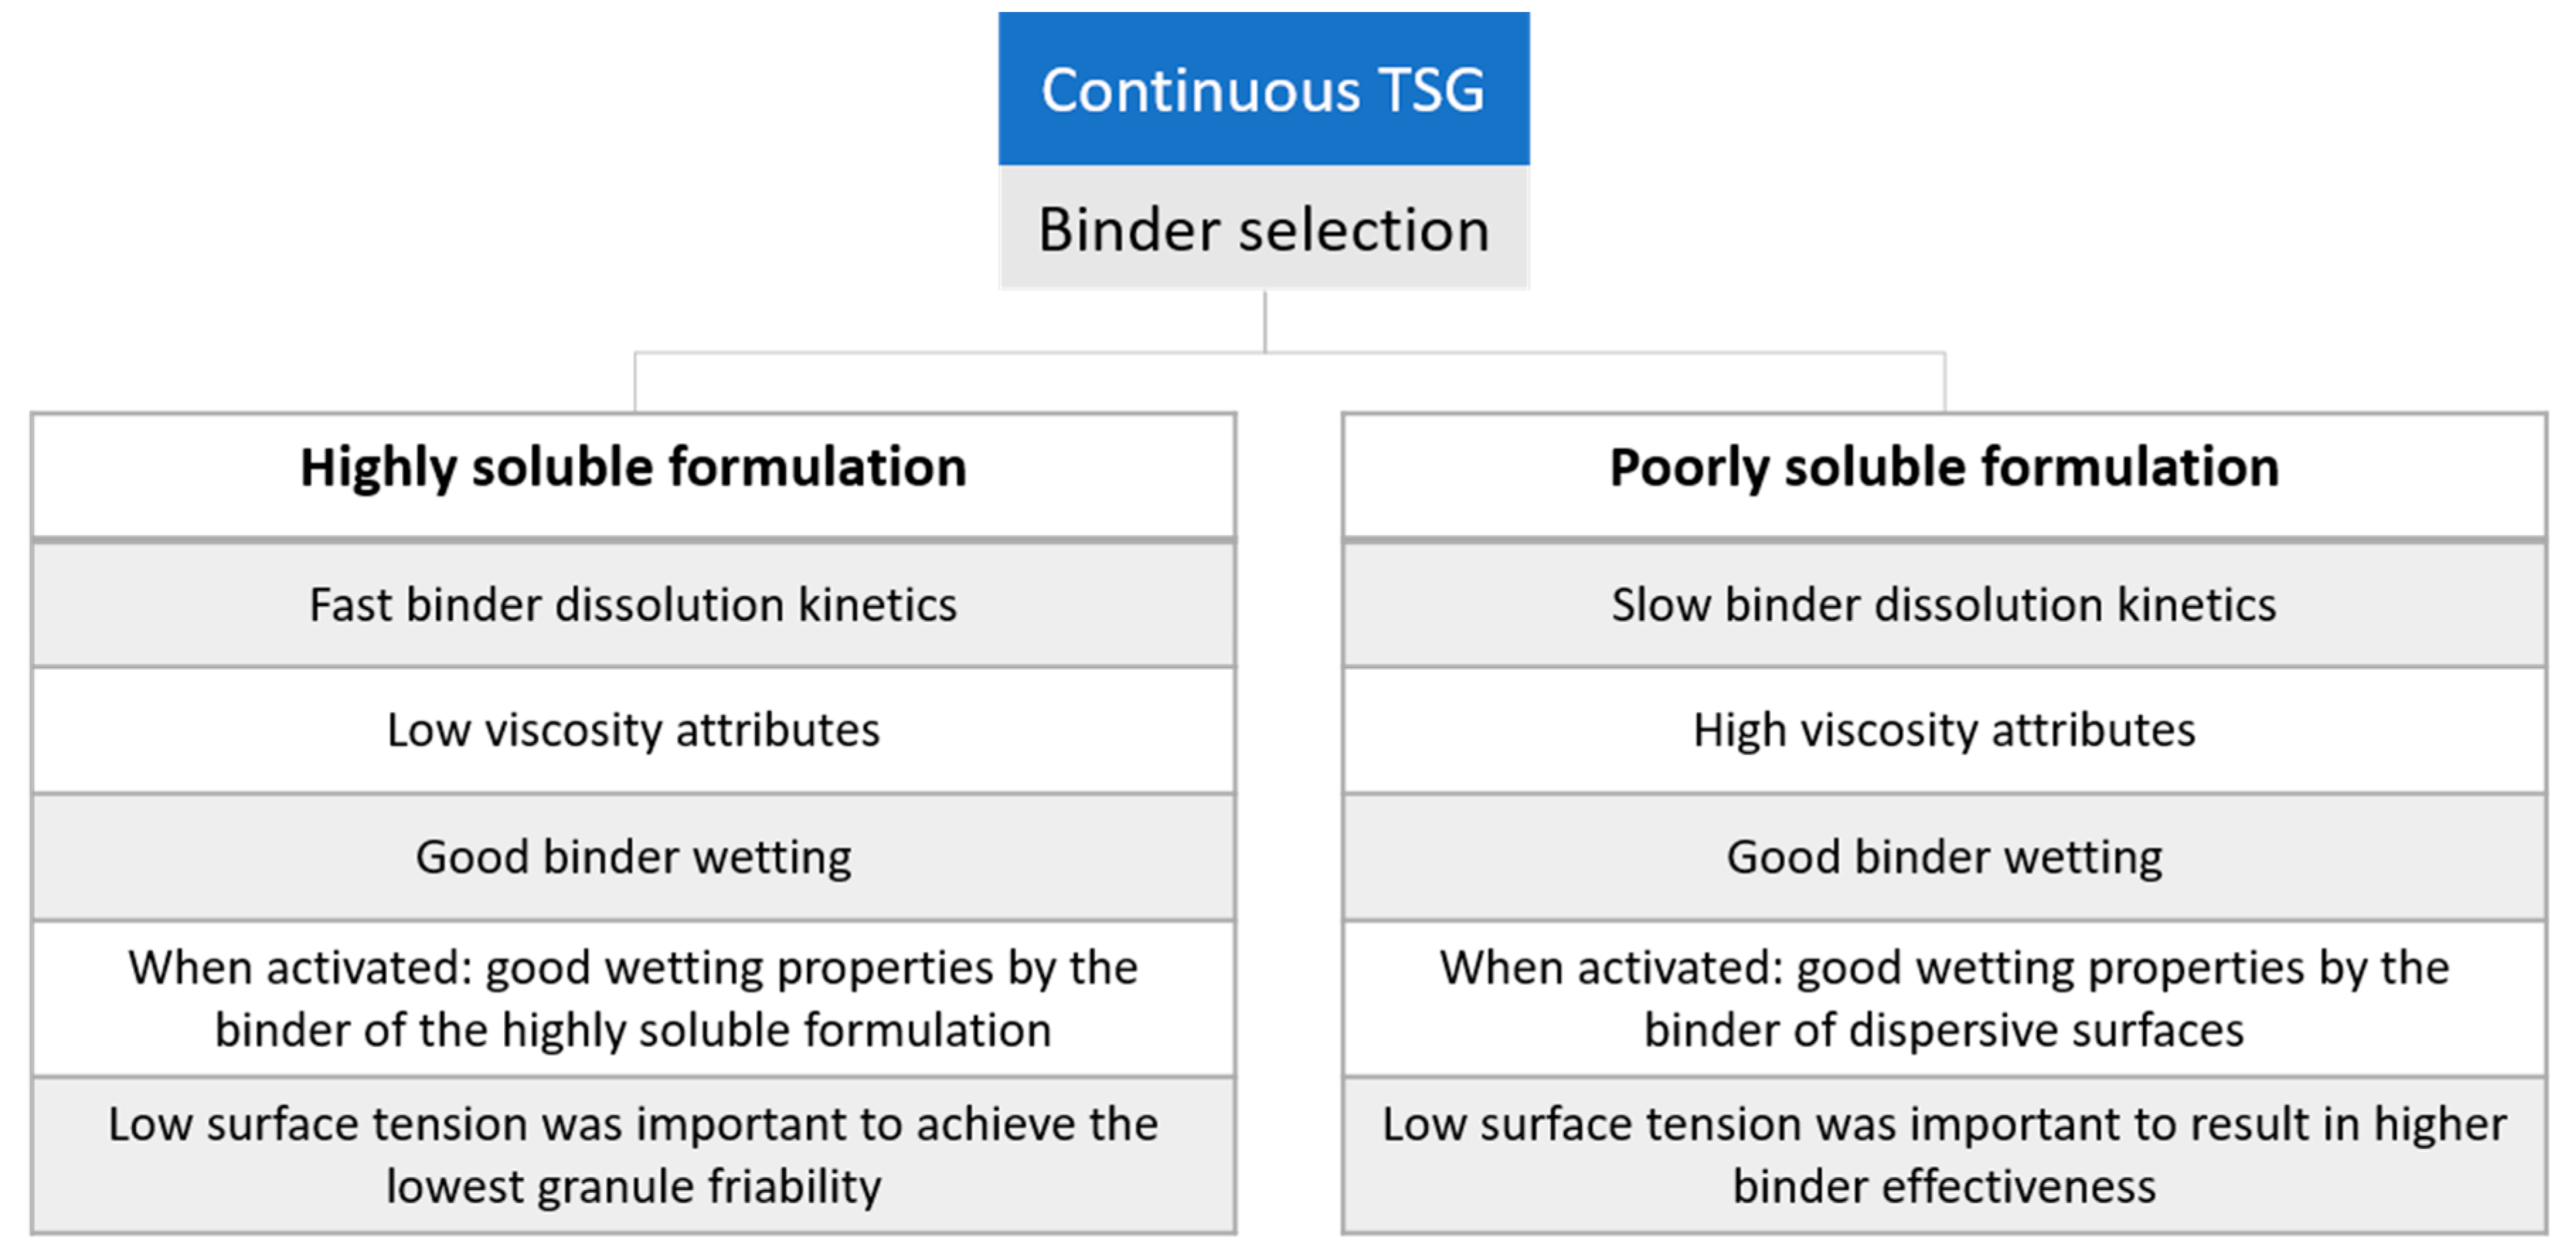 Concise overview of the critical binder attributes influencing the binder effectiveness for a poorly and highly soluble formulation